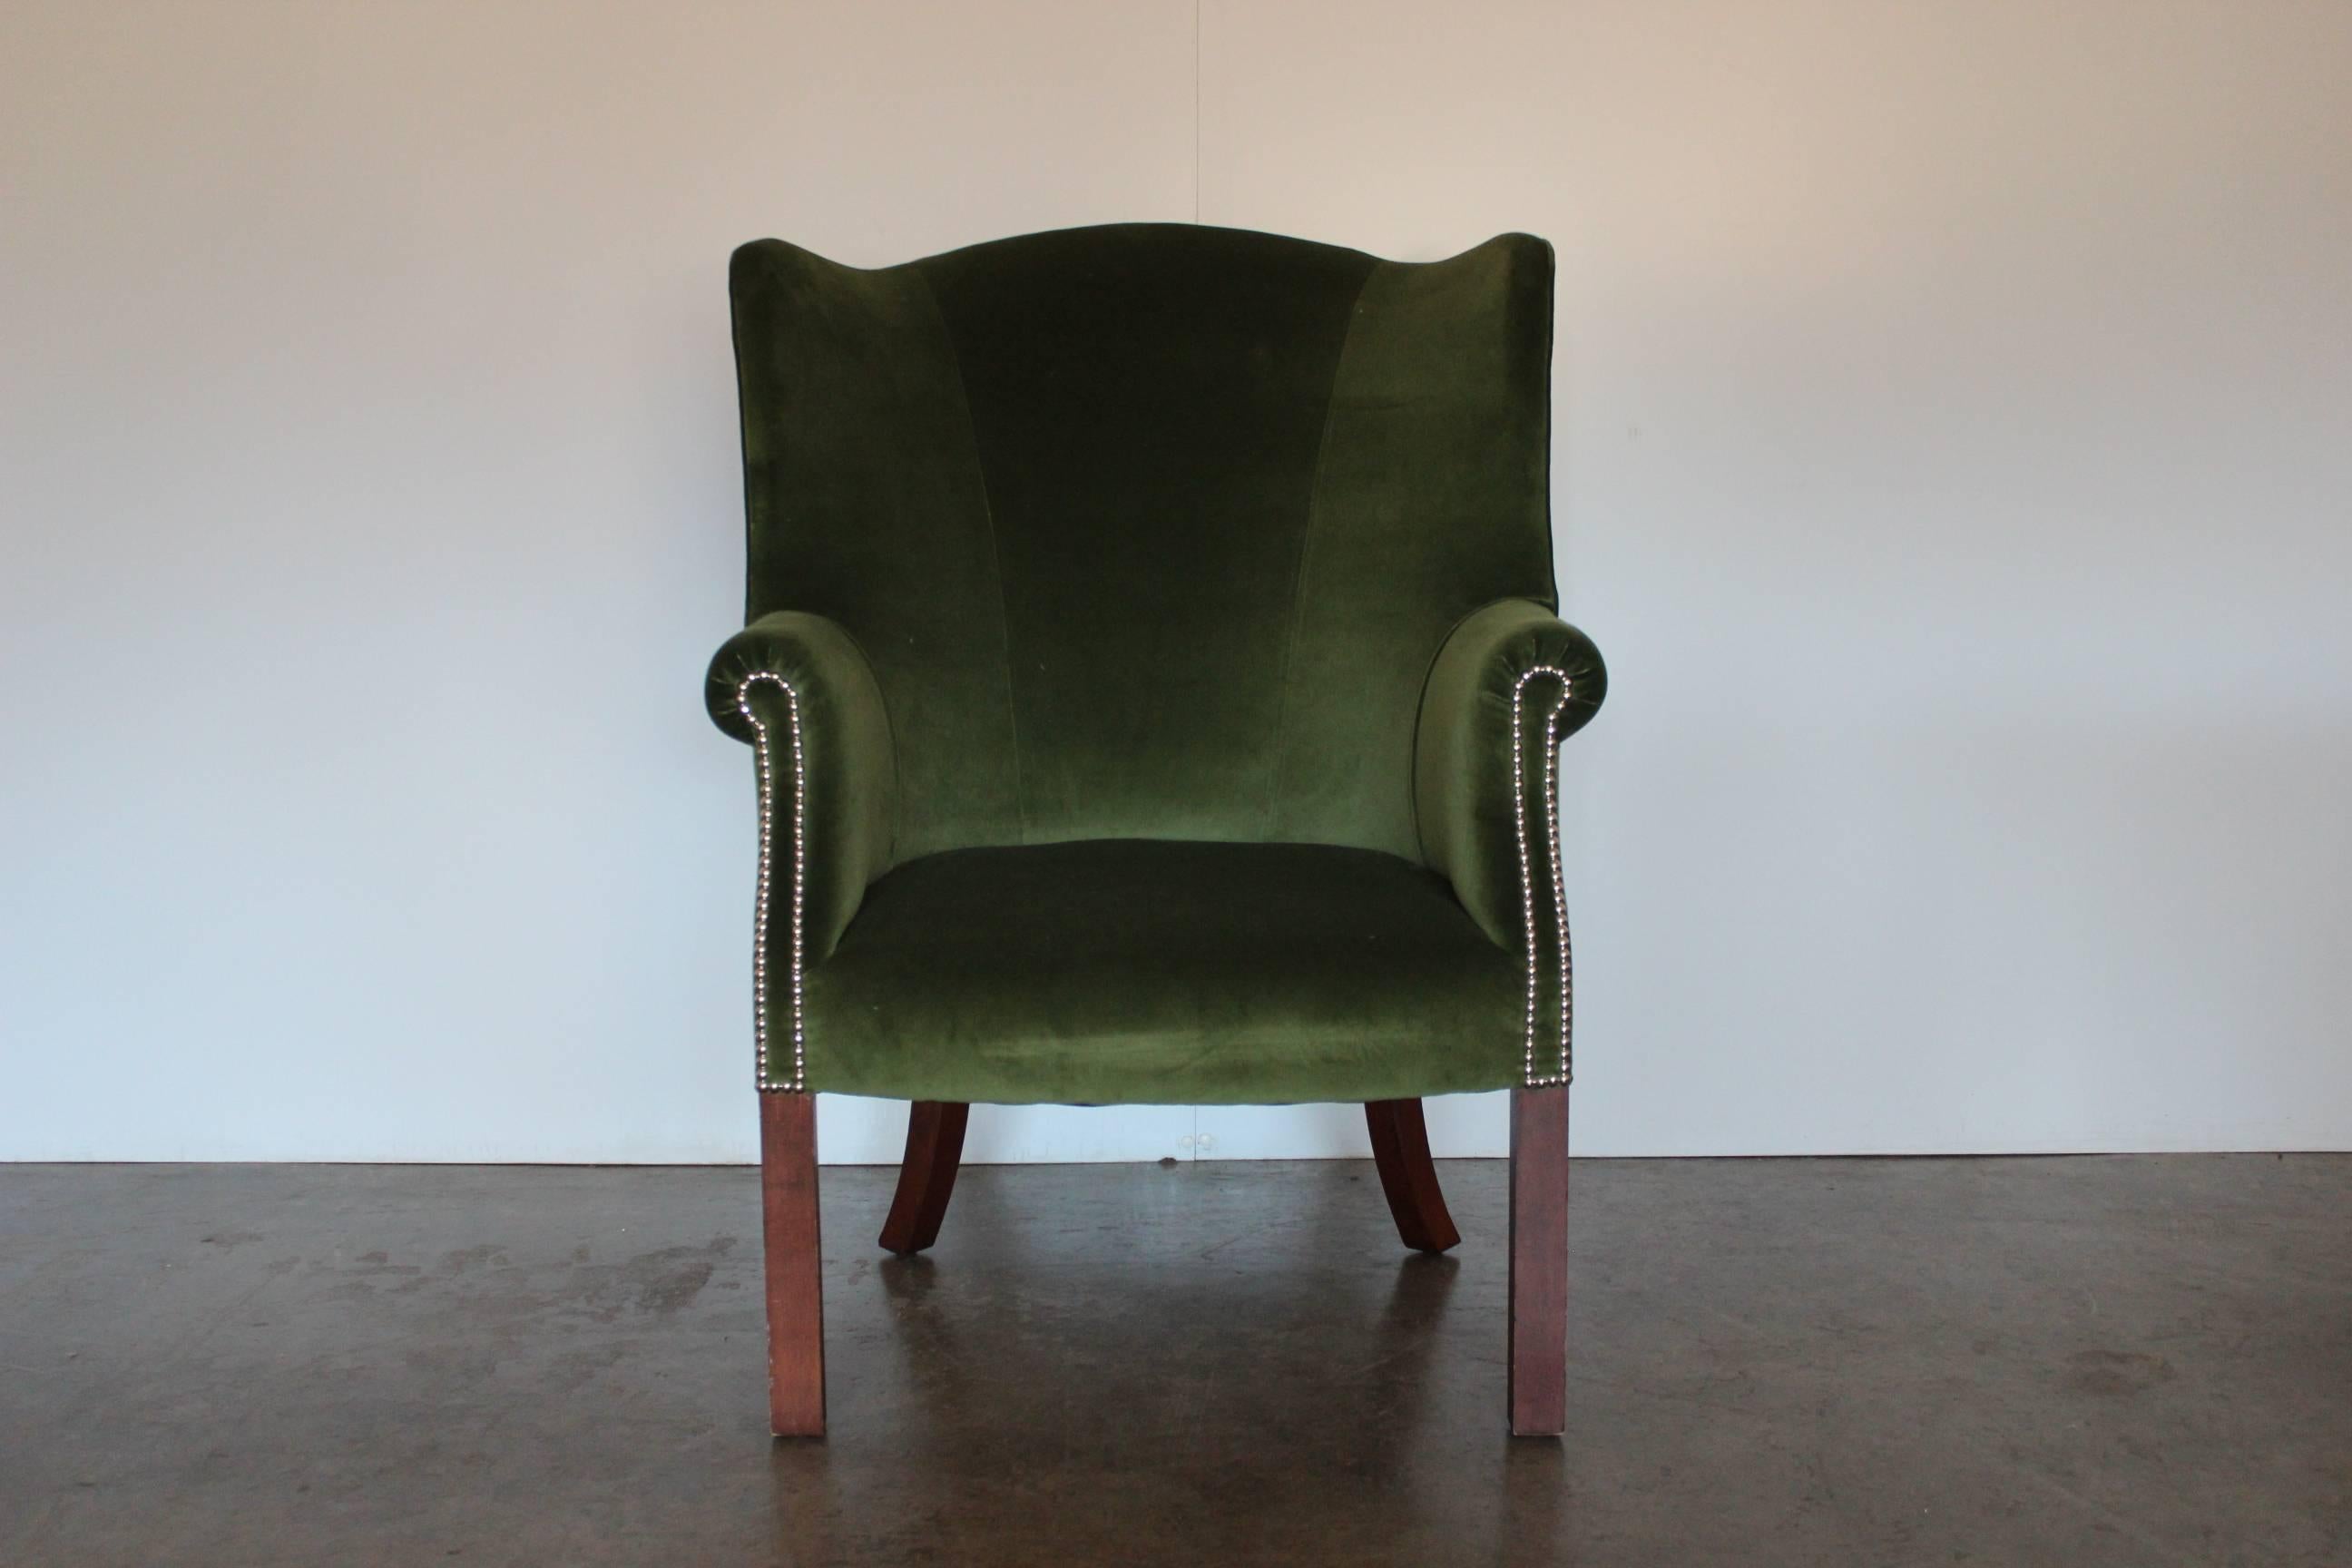 On offer on this occasion is an incredibly rare Ralph Lauren compact “wingback” armchair, dressed in a peerless, top-grade, Ralph Lauren “English Riding” cotton velvet fabric in a warm, welcoming royal green, and with polished-chrome stud-detailing